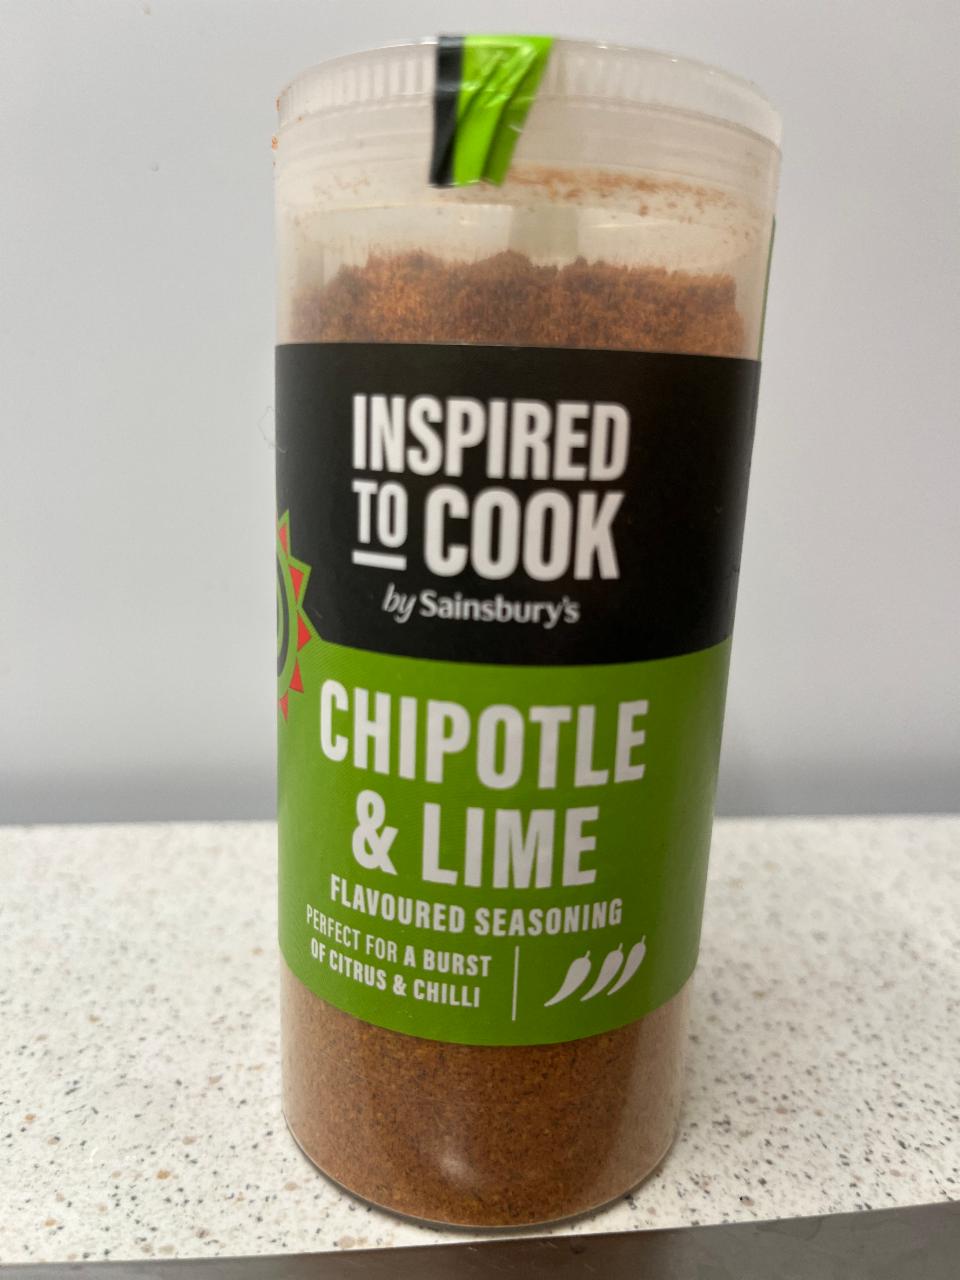 Fotografie - Chipotle & Lime flavoured seasoning Inspired To Cook by Sainsbury’s